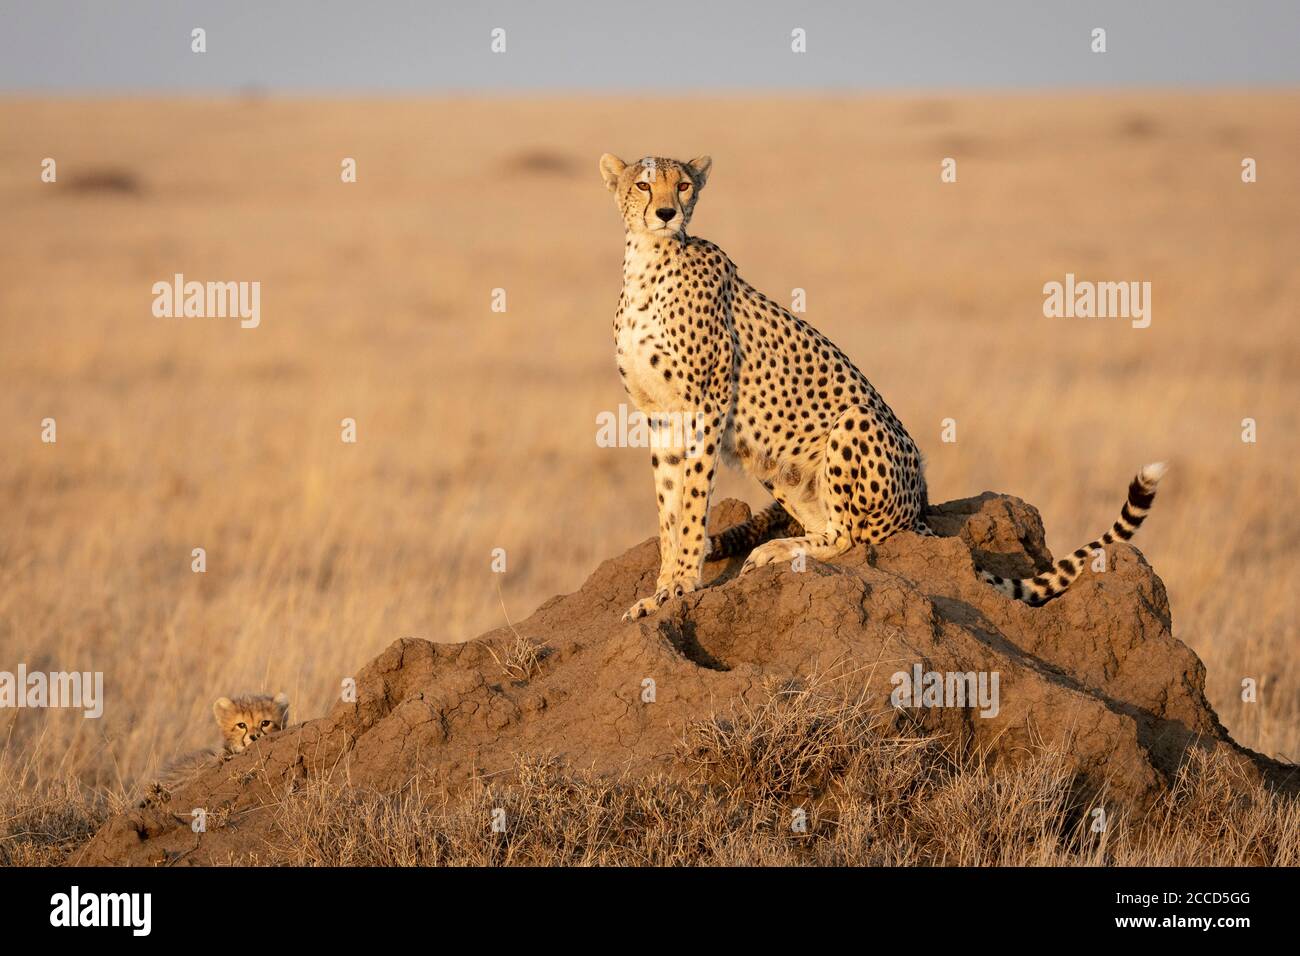 Mother and baby sitting on a termite mound looking alert in Serengeti National Park in Tanzania Stock Photo